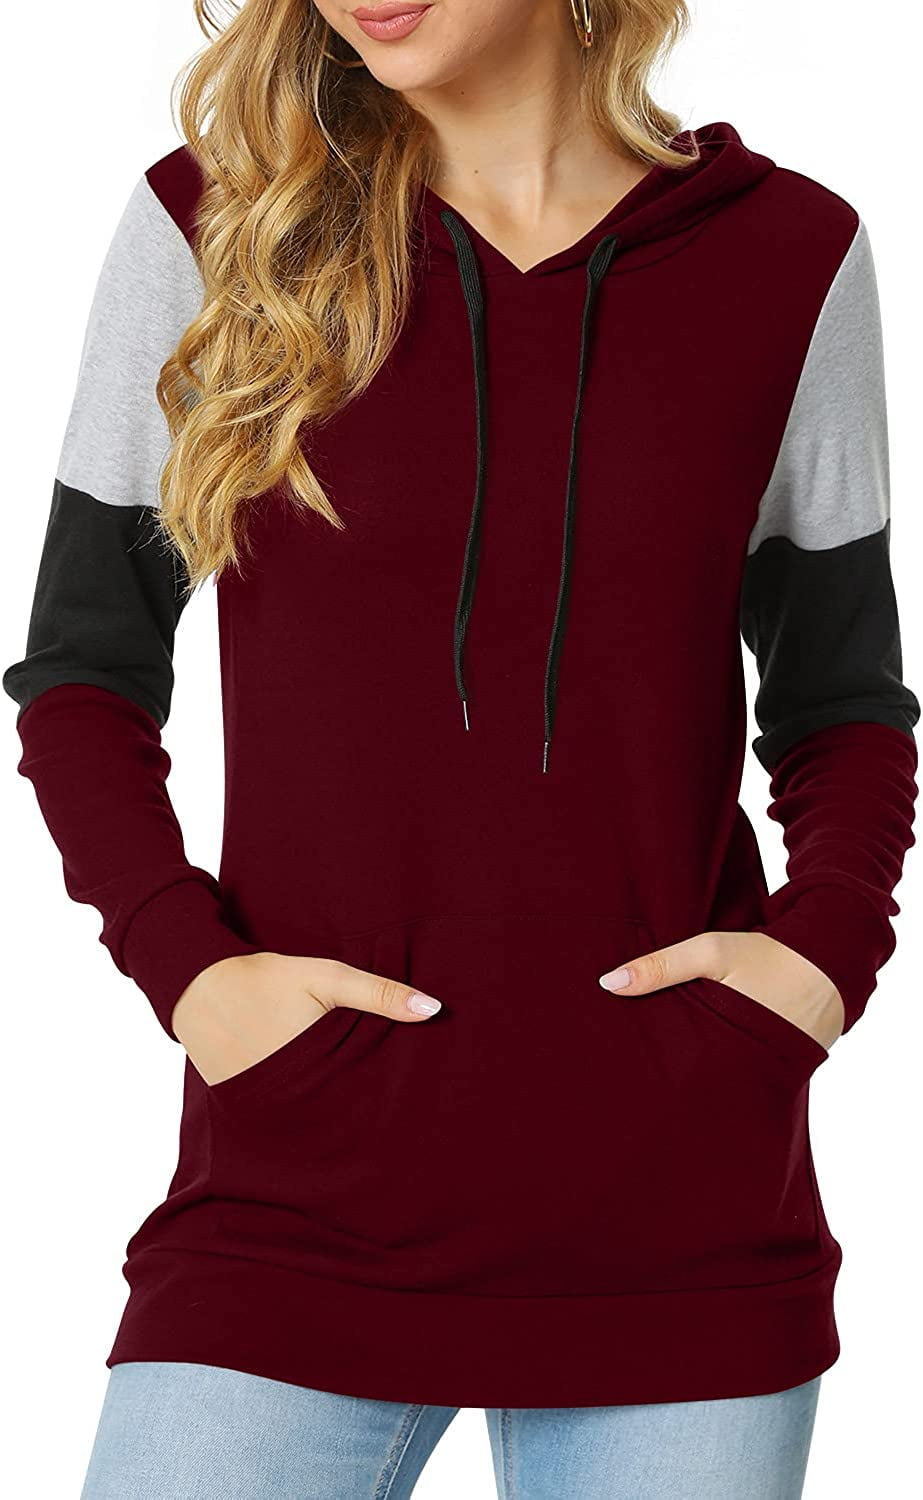 ppyoung Women's Casual Drawstring Pullover Long Sleeve Workout ...